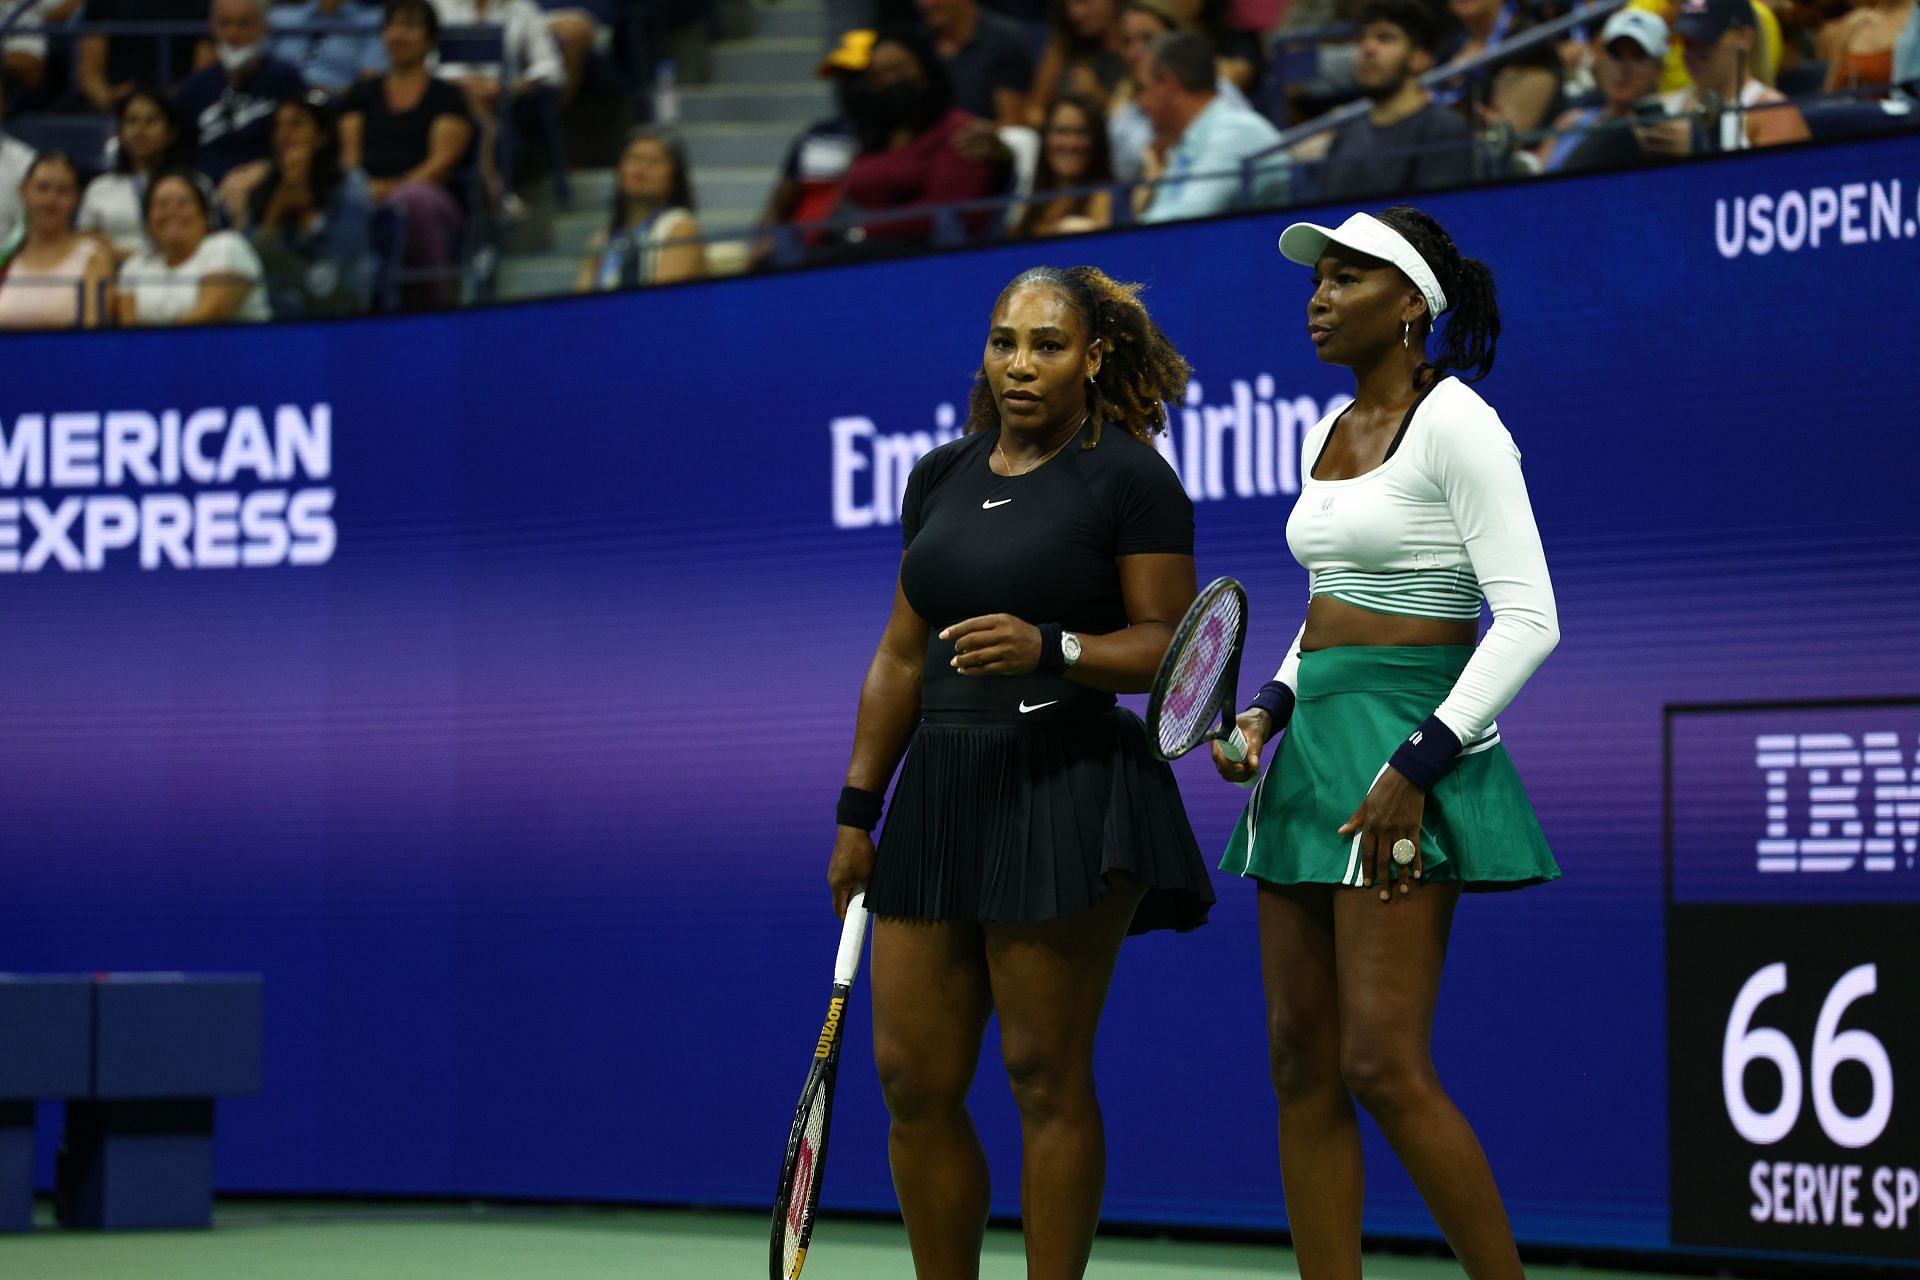 Serena Williams (L) and Venus Williams at the 2022 US Open - Day 4.